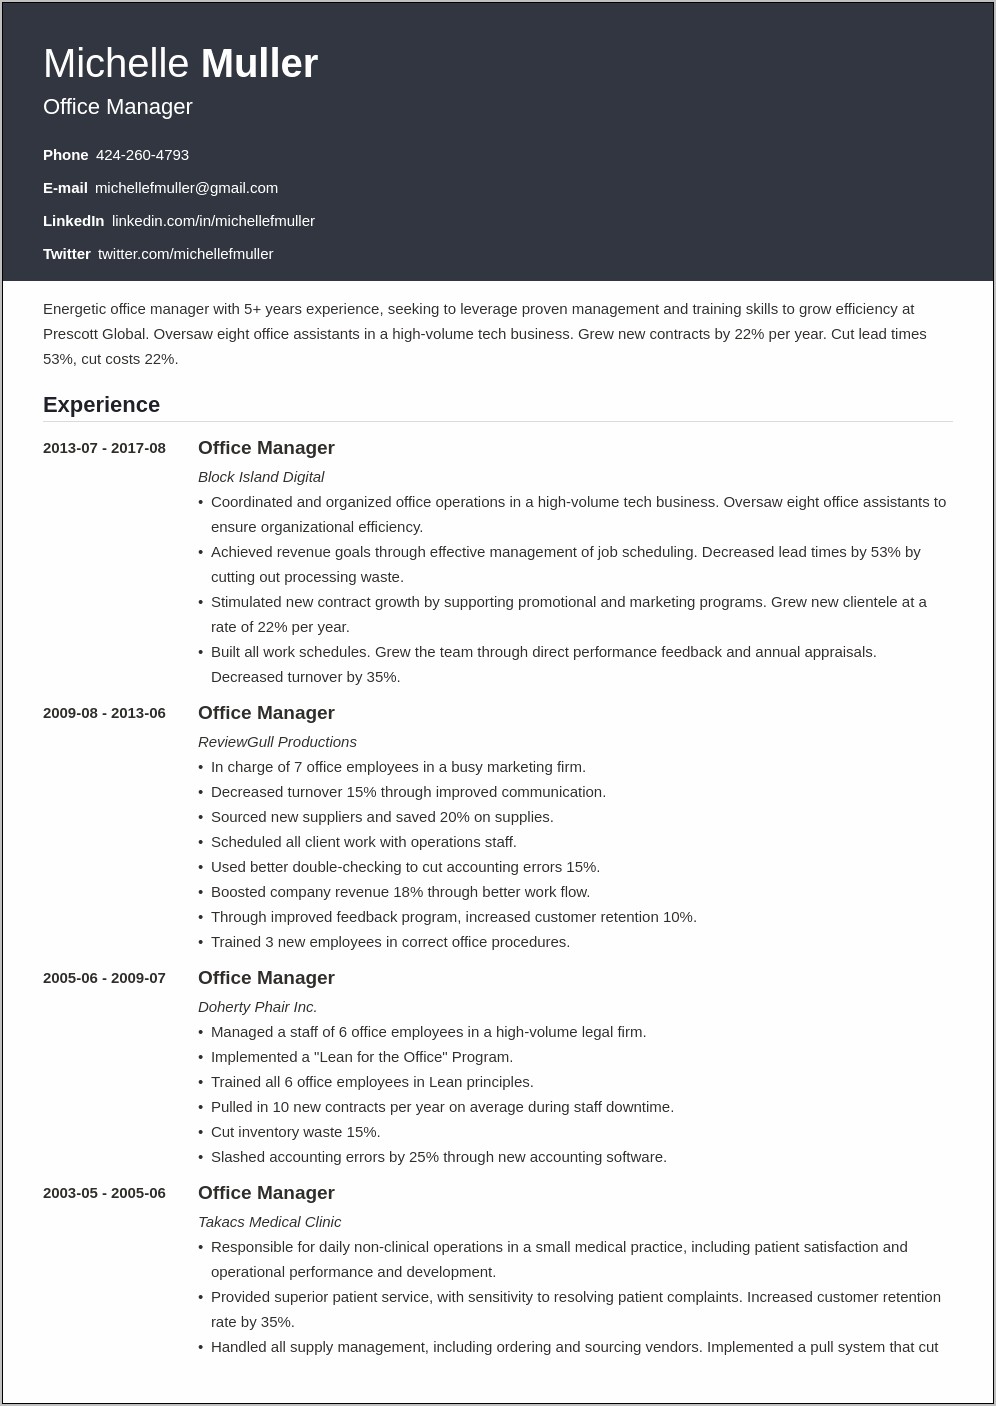 Resume Format For 5 Years Experience In It